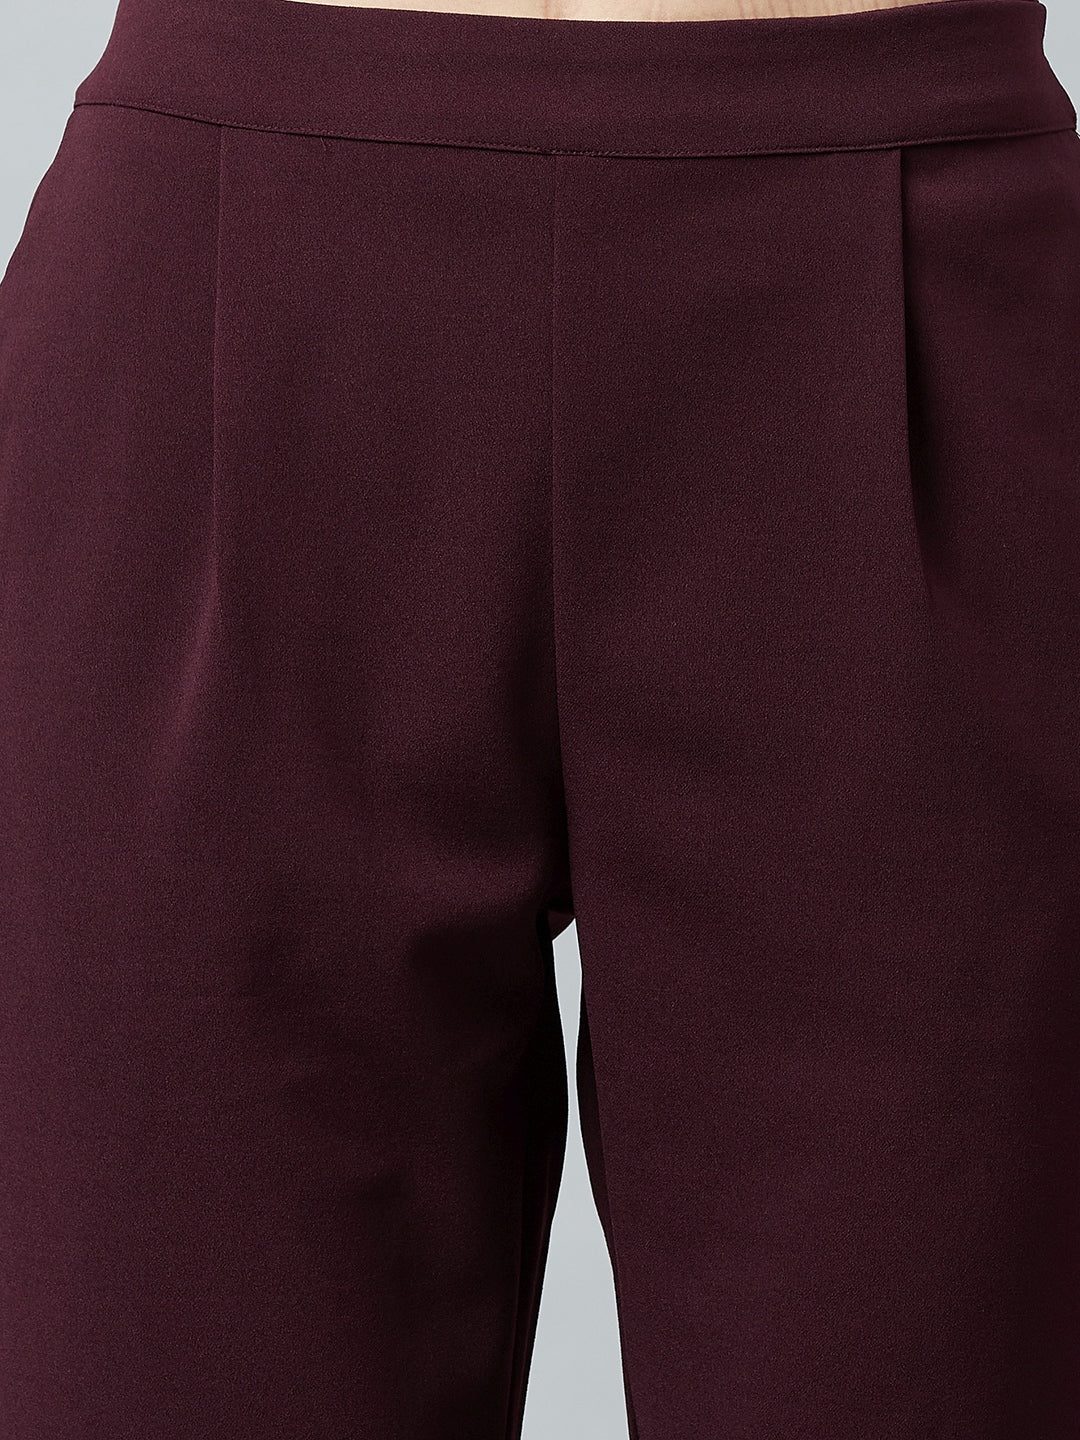 Athena Women Burgundy Regular Fit Solid Formal Trousers - Athena Lifestyle